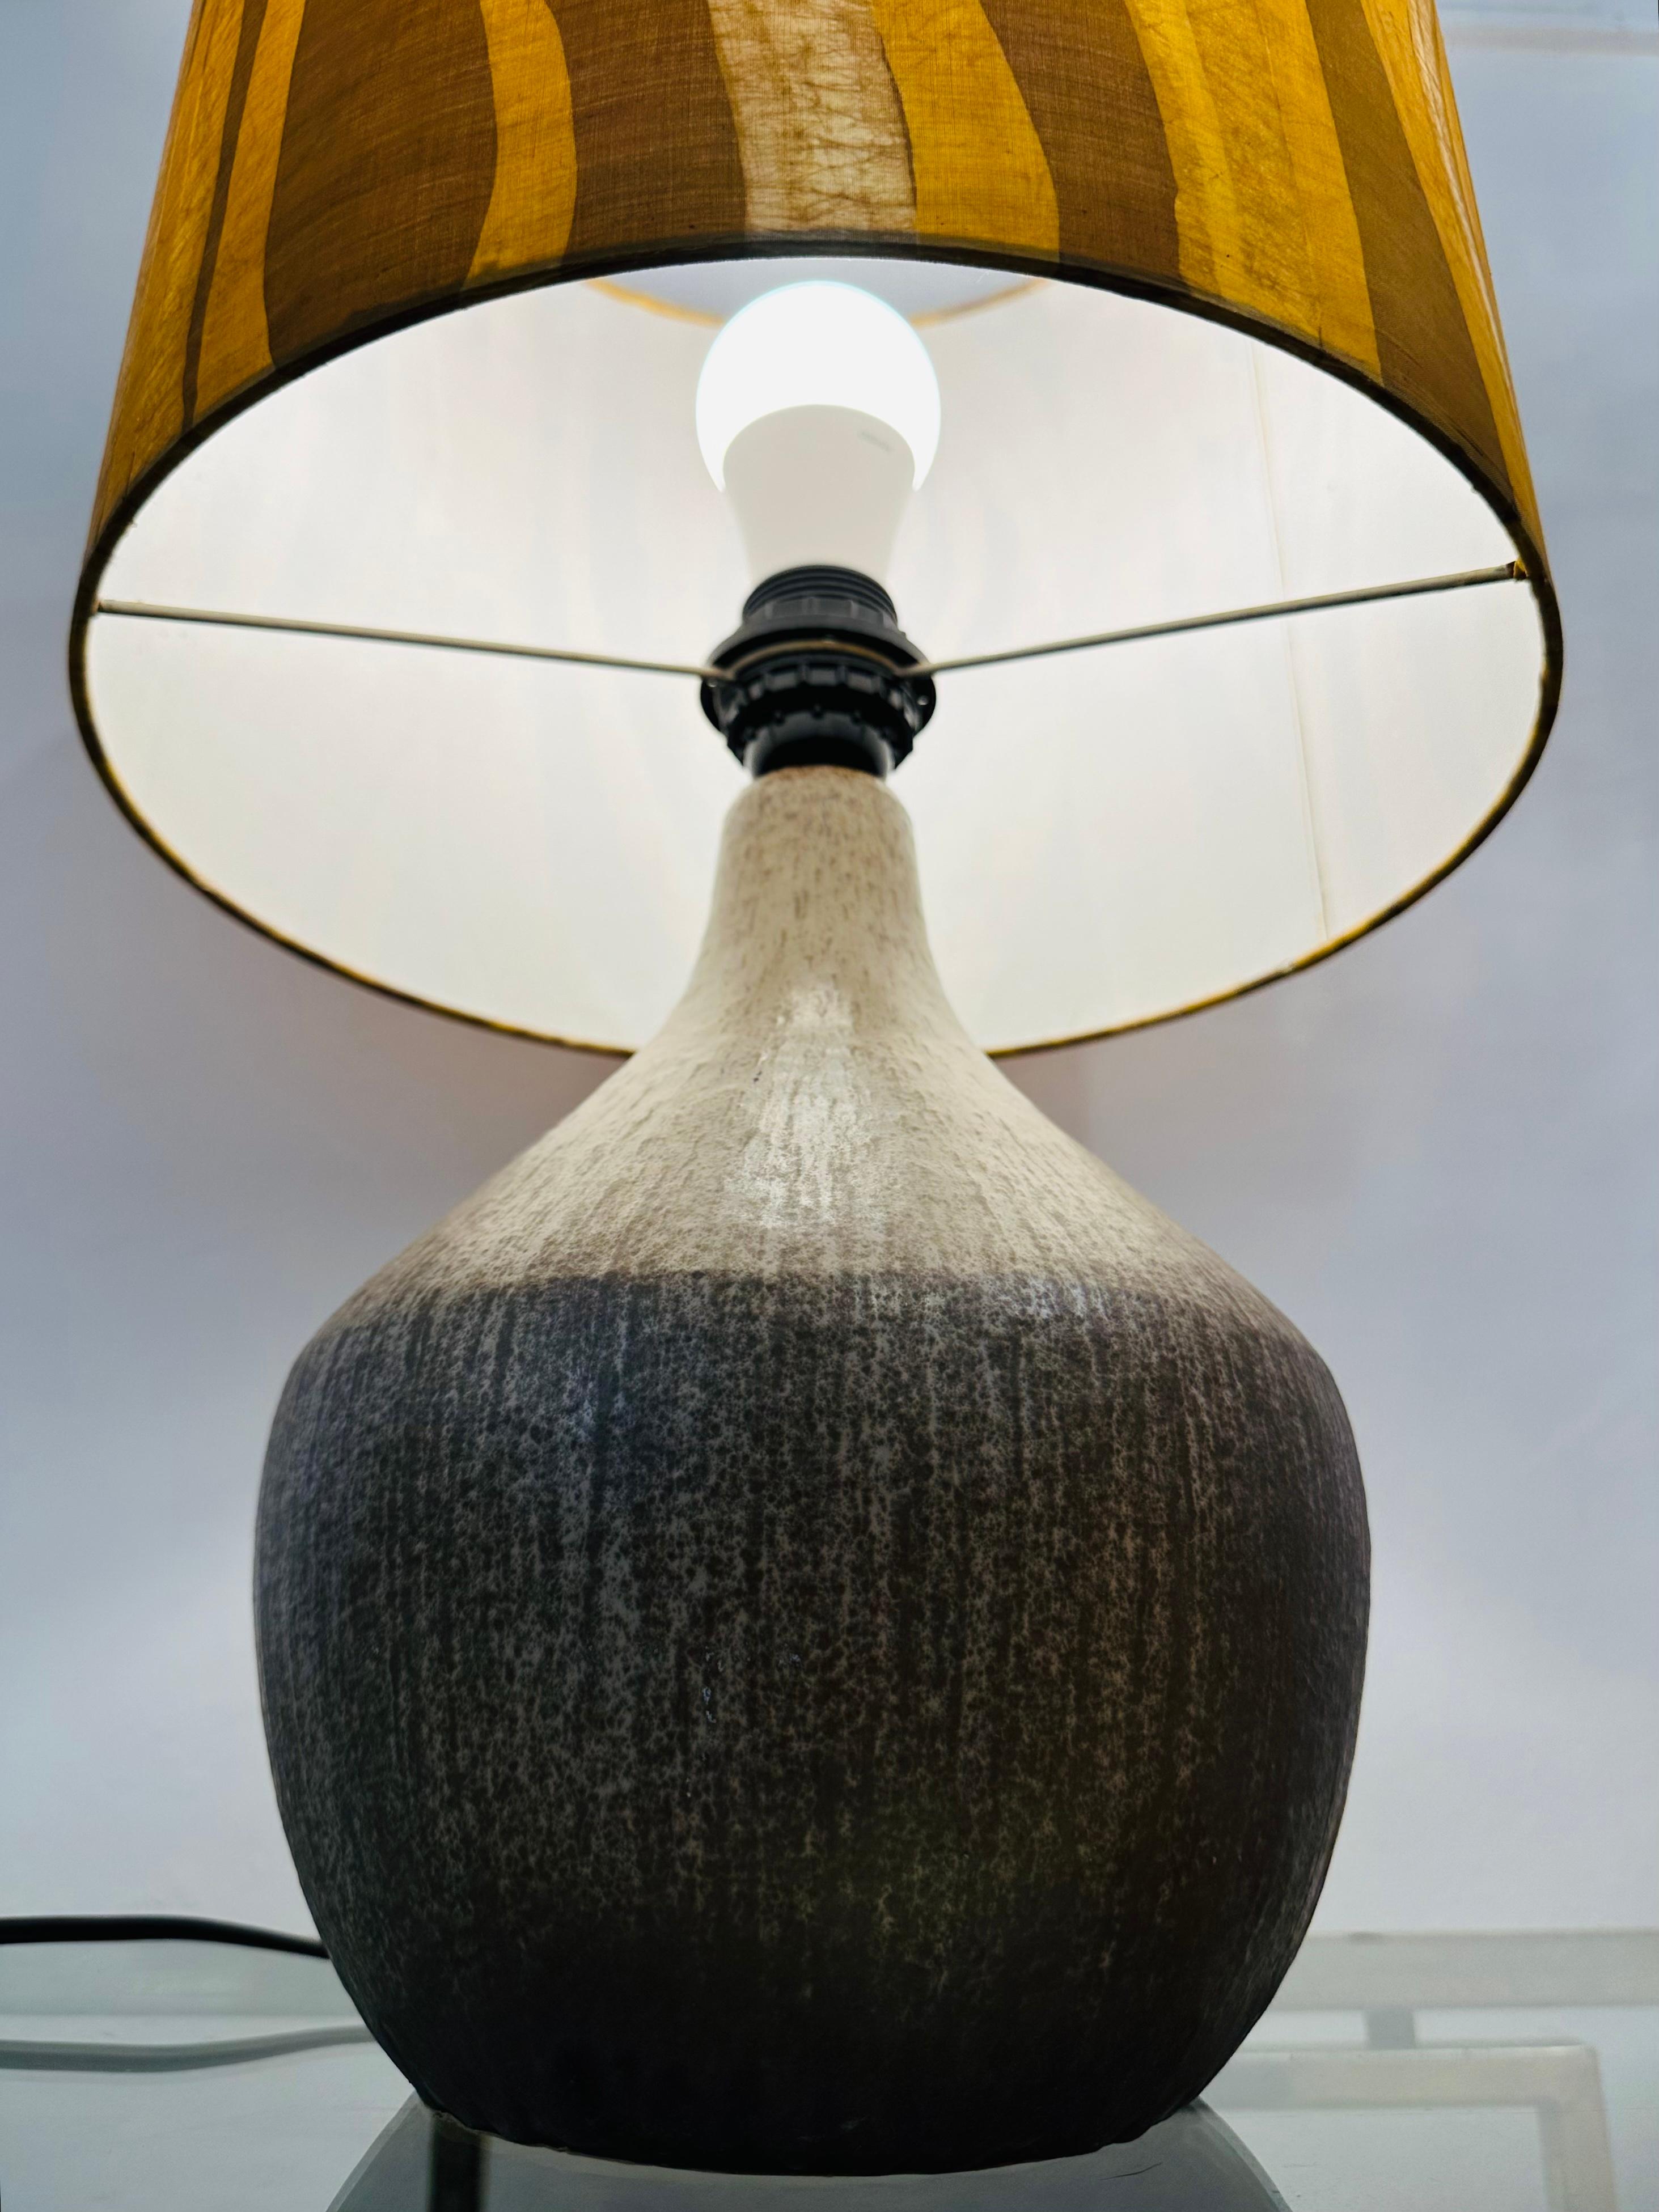 1970s French Earthenware Ceramic Glazed Table Lamp inc Original Geometric Shade For Sale 4